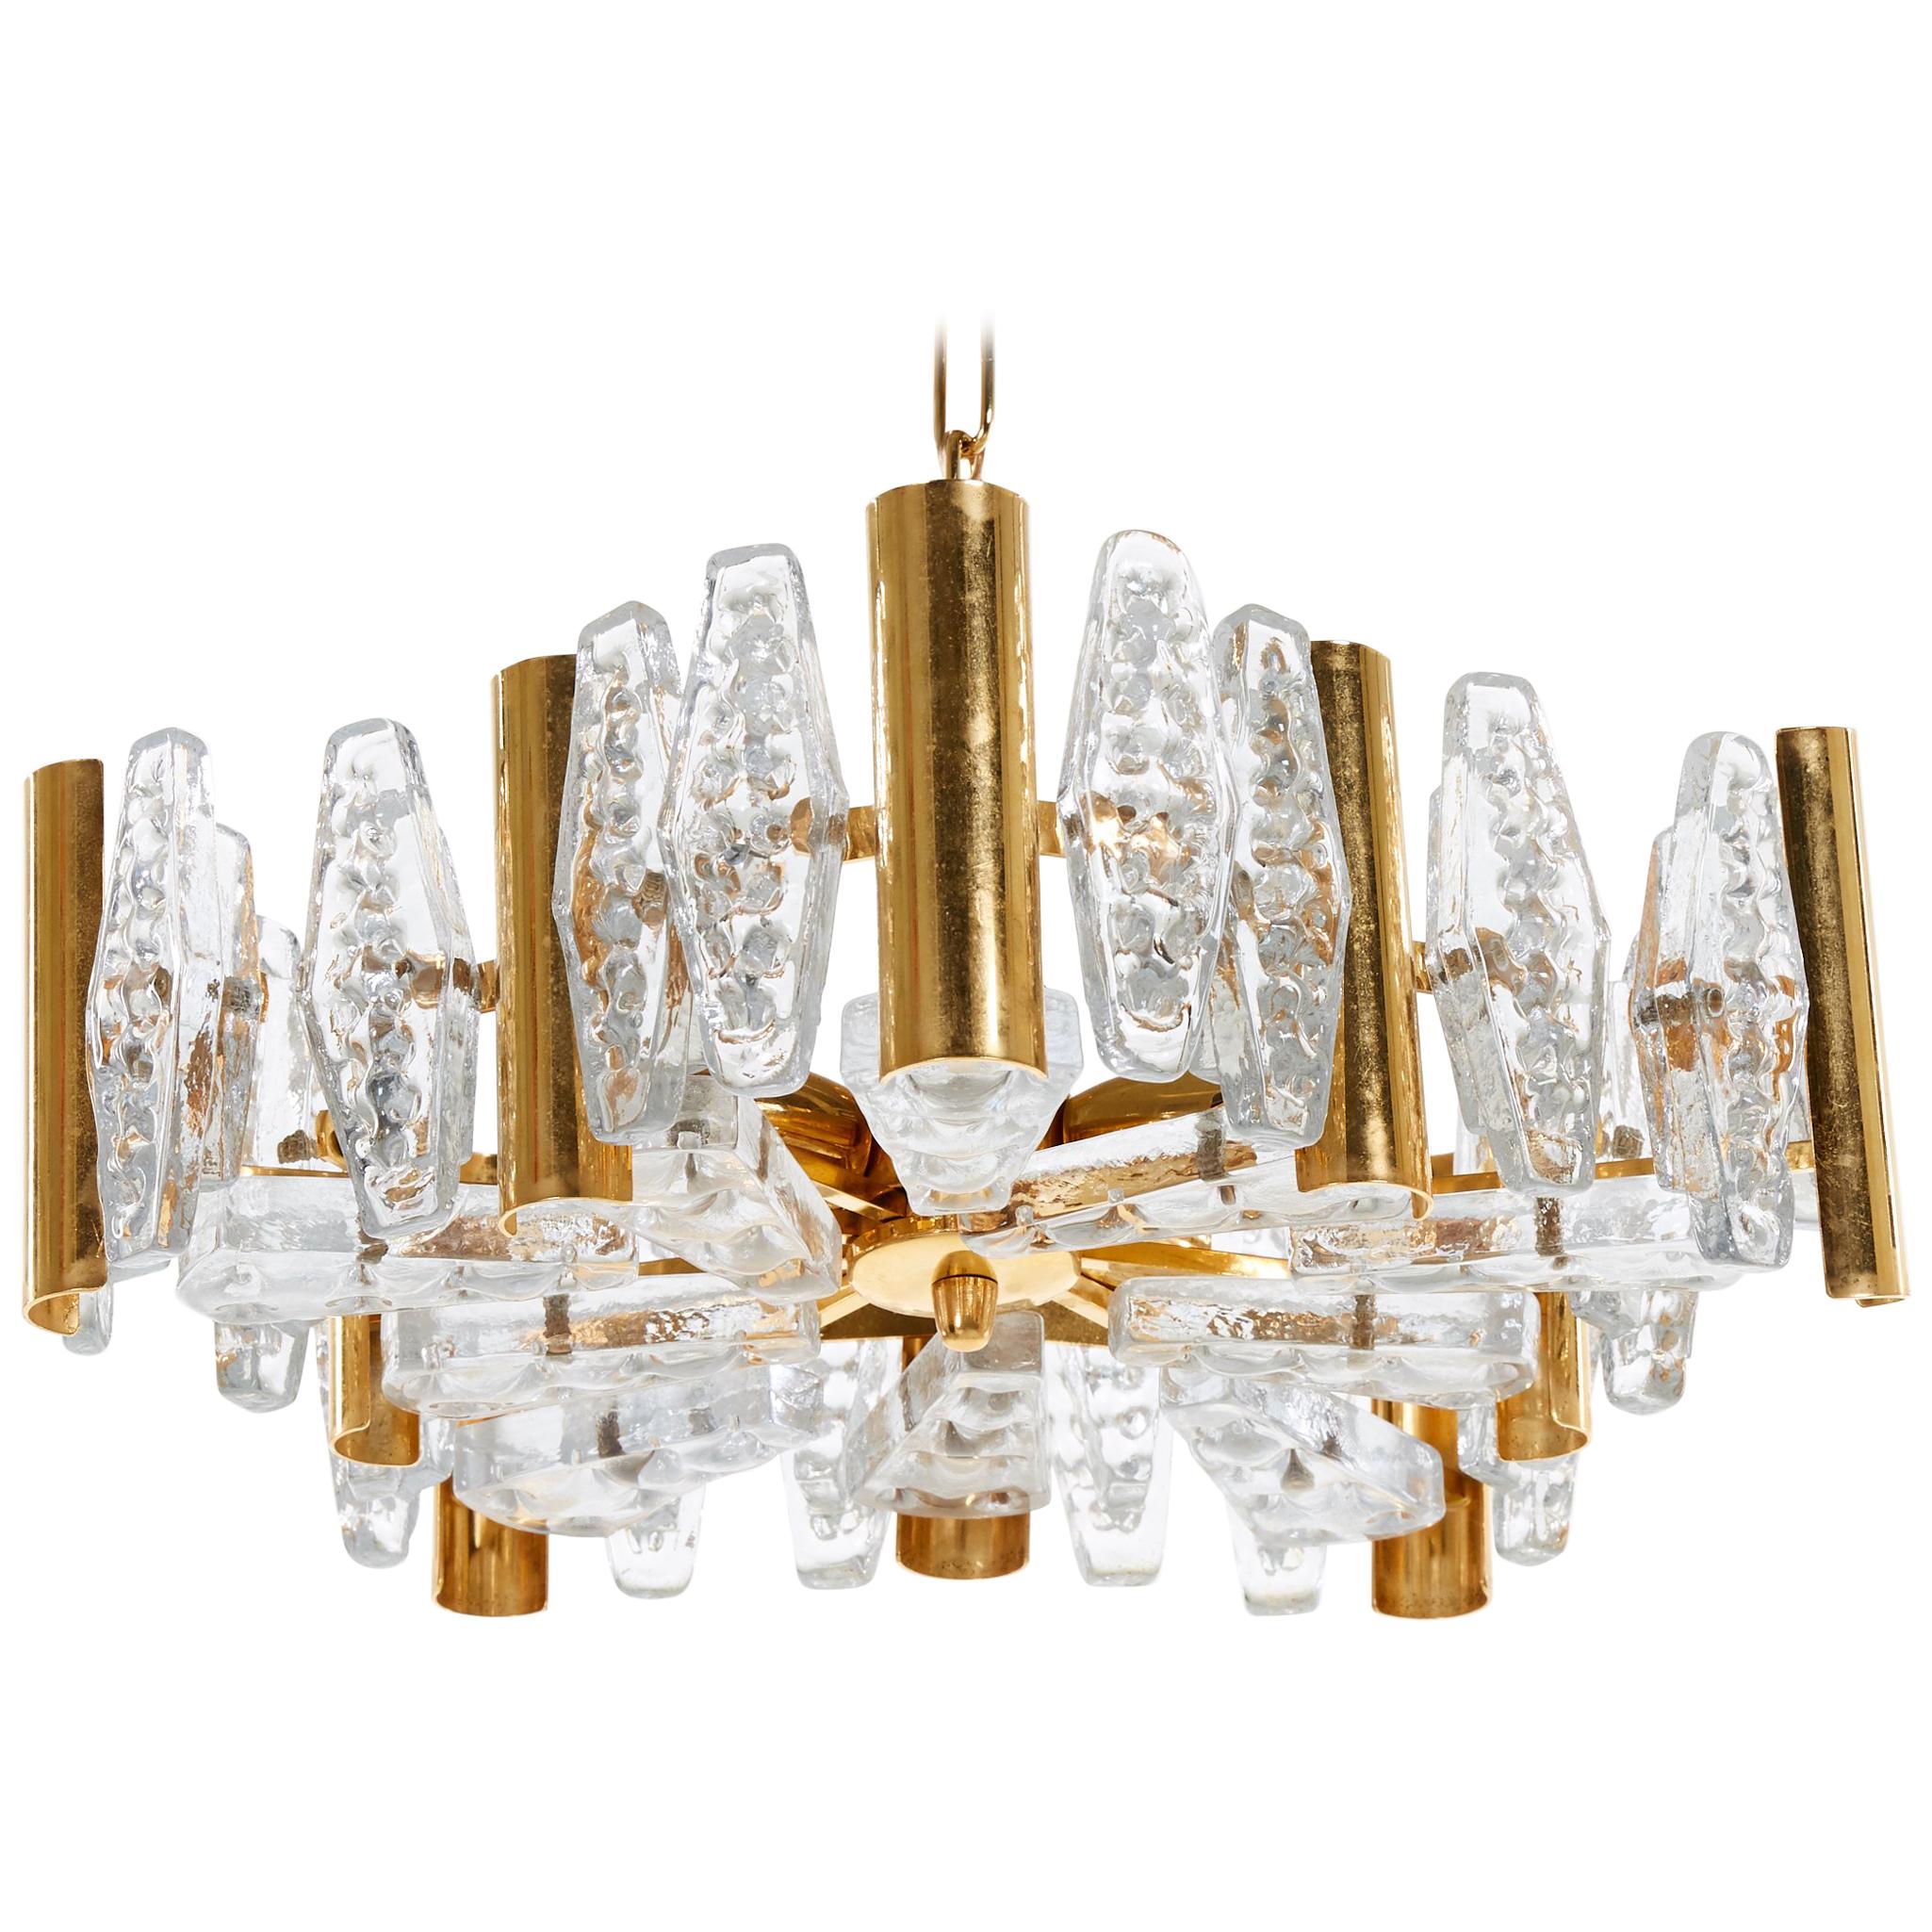 Chandelier by Carl Fagerlund for Orrefors Glassworks